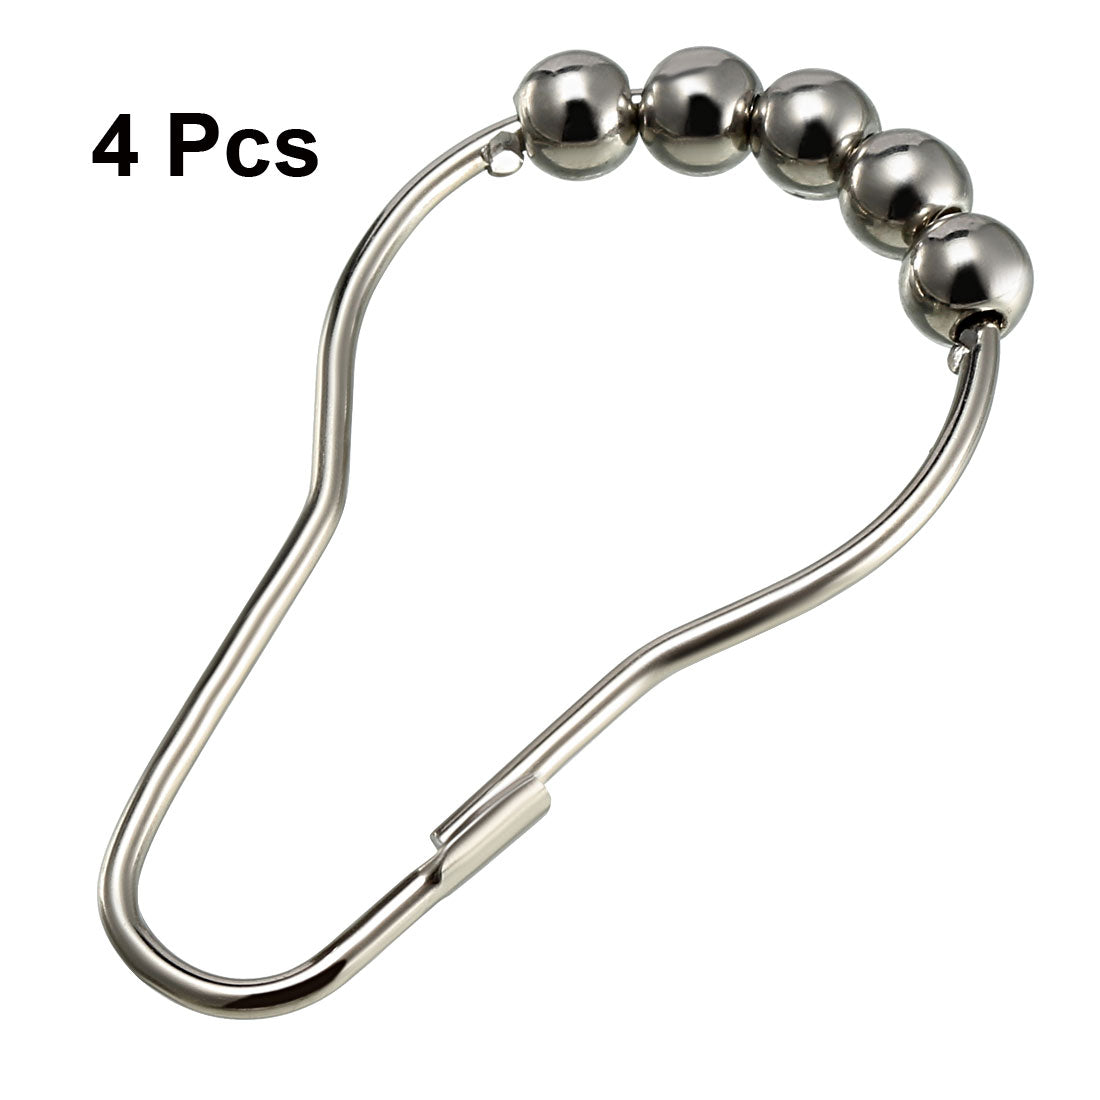 uxcell Uxcell Shower Curtain Ring Hooks Metal for Bathroom Shower Rods Curtains Liners Iron Ball 4 Pcs